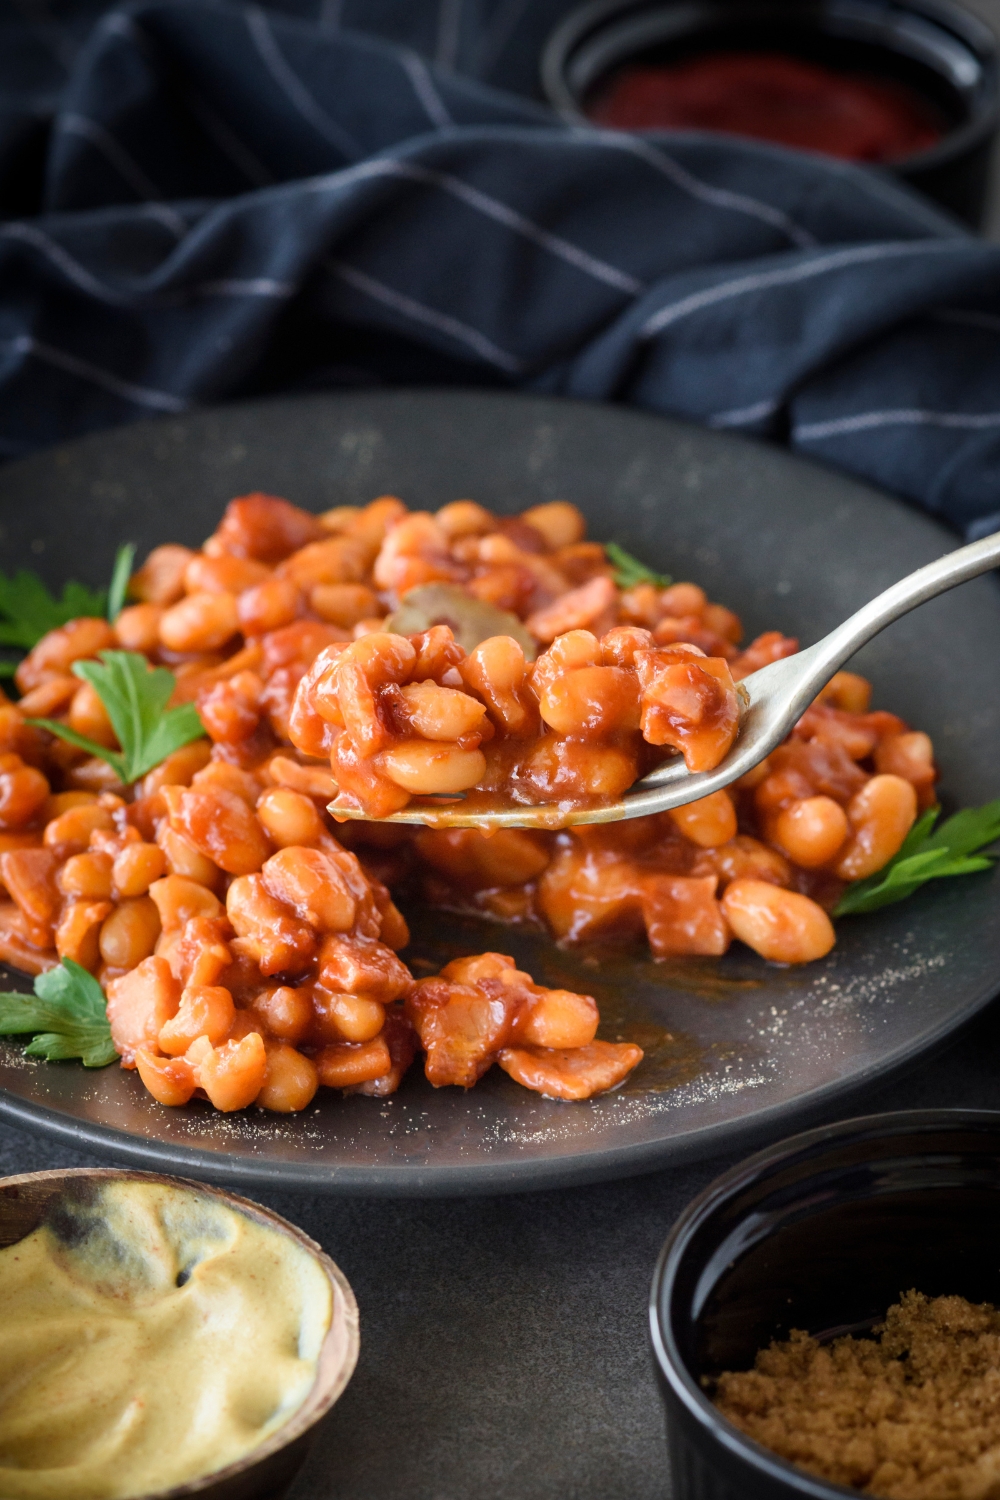 A fork with baked beans on it over a plate with more baked beans.